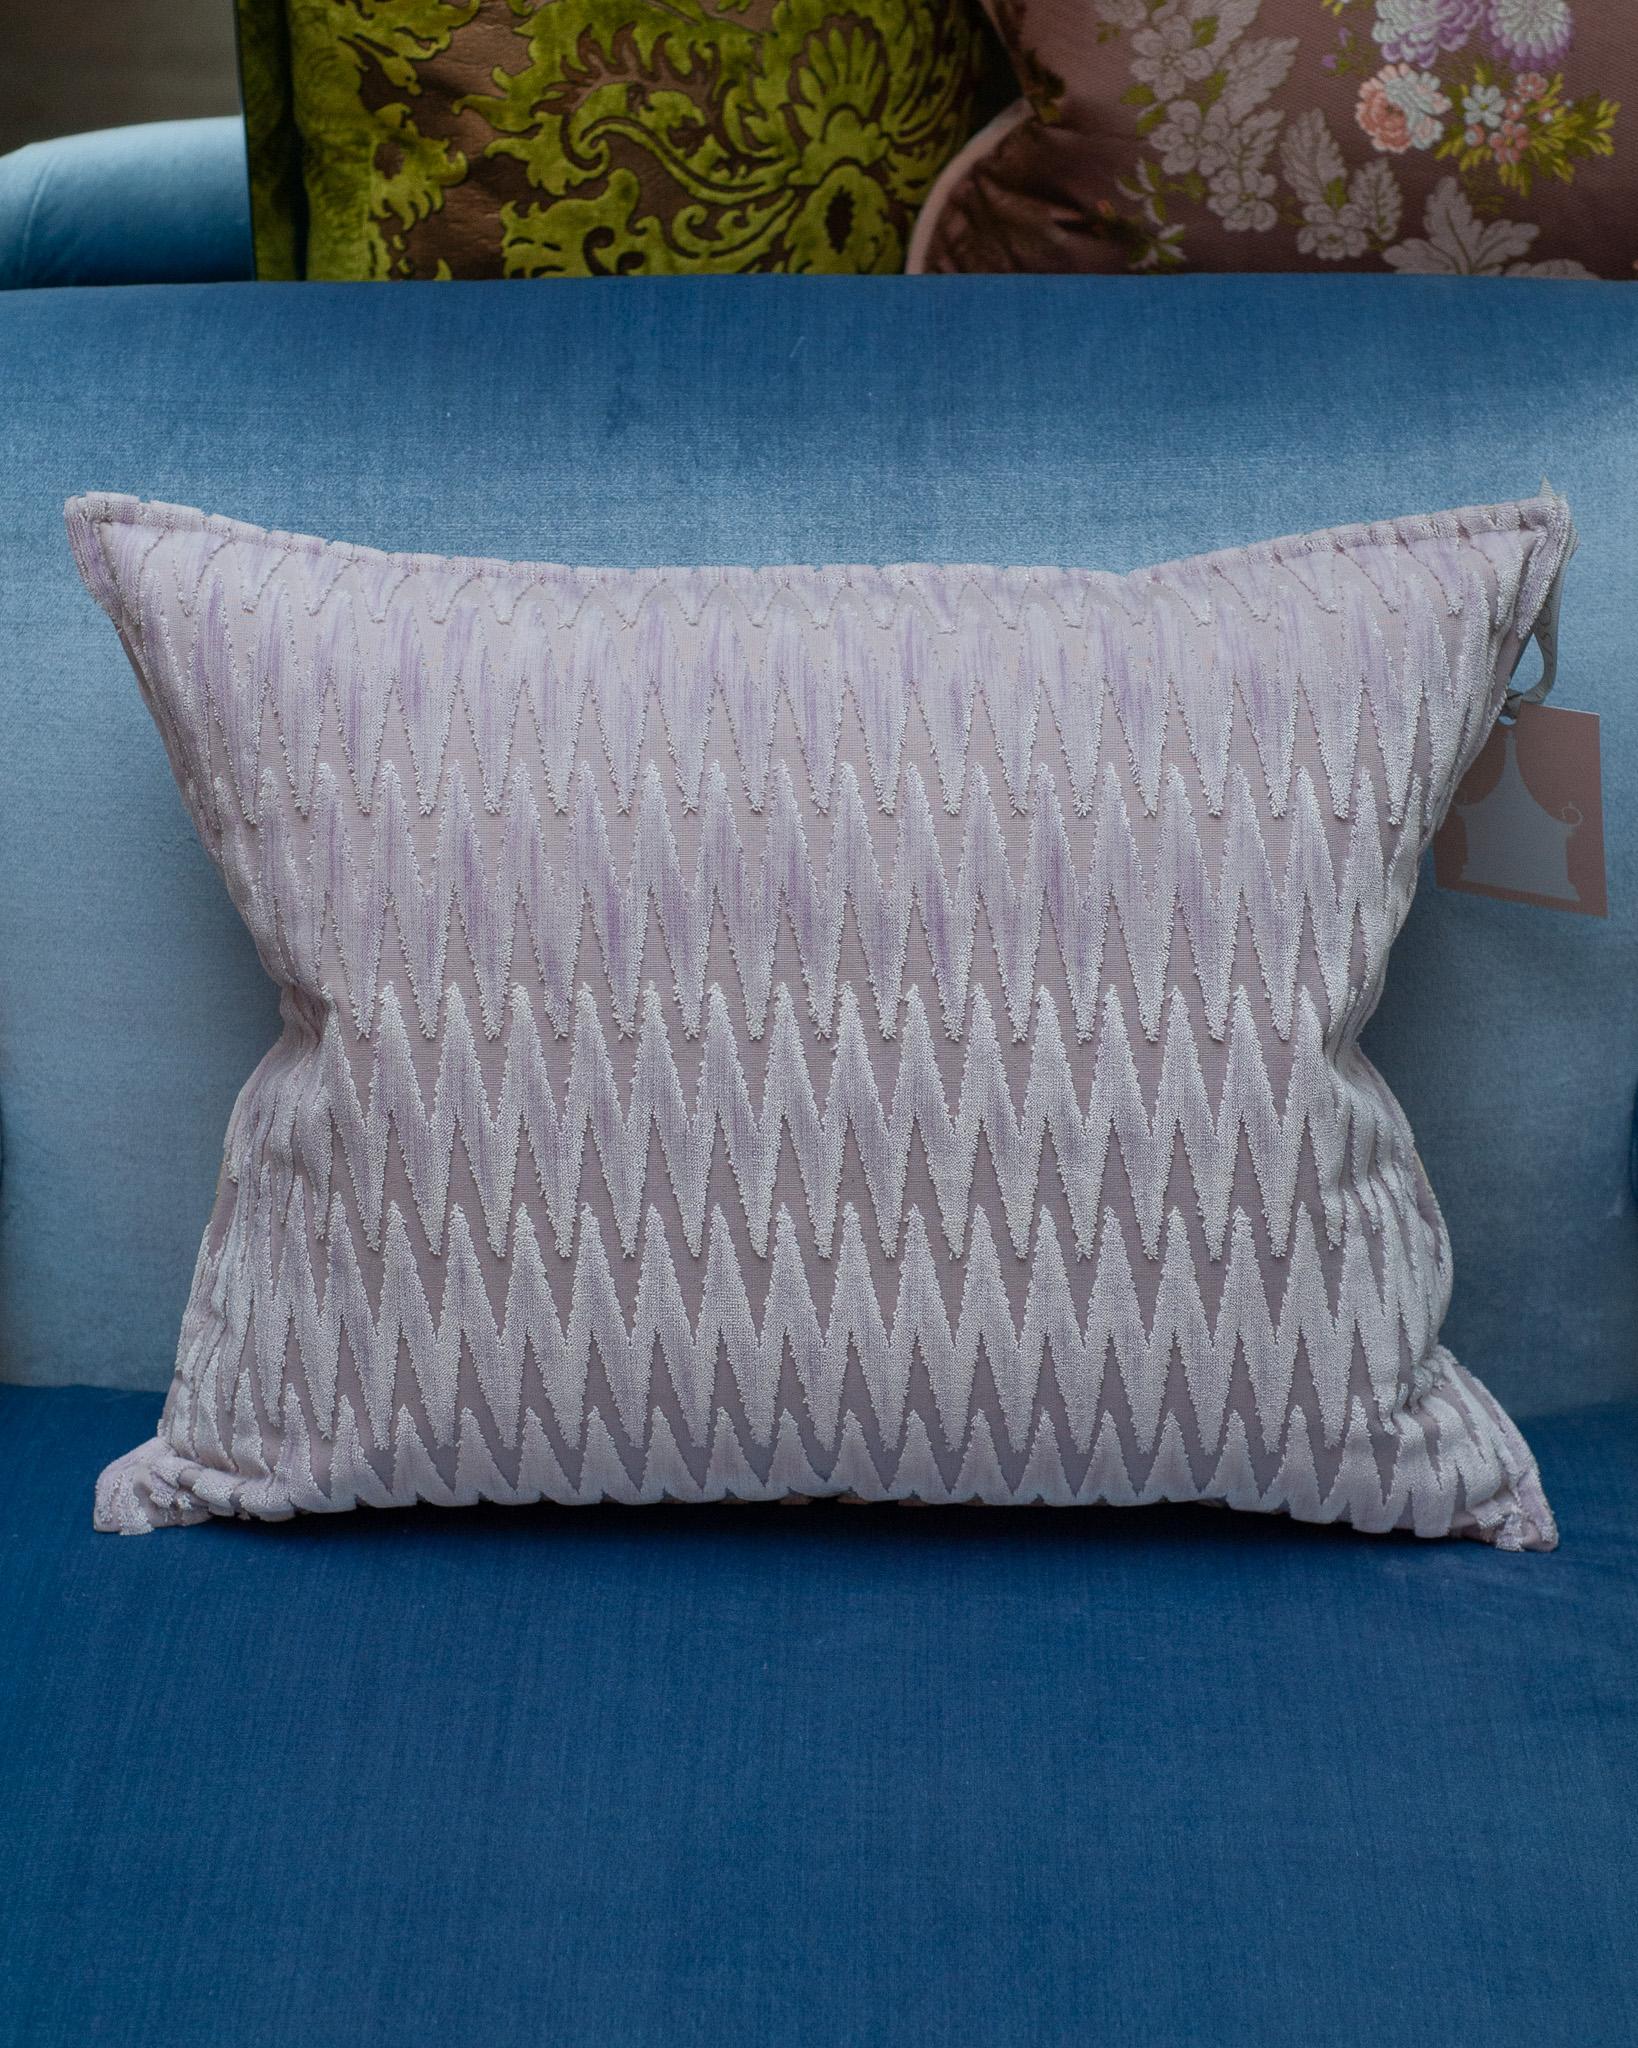 A stunning Bevilacqua Tessuti silk velvet pillow in lilac with zig zag pattern. Made in Bevilacqua's workshop for Maison Nurita, this luxurious pillow is backed in Bevilacqua creme silk moiré. Filled with the highest quality down and feather